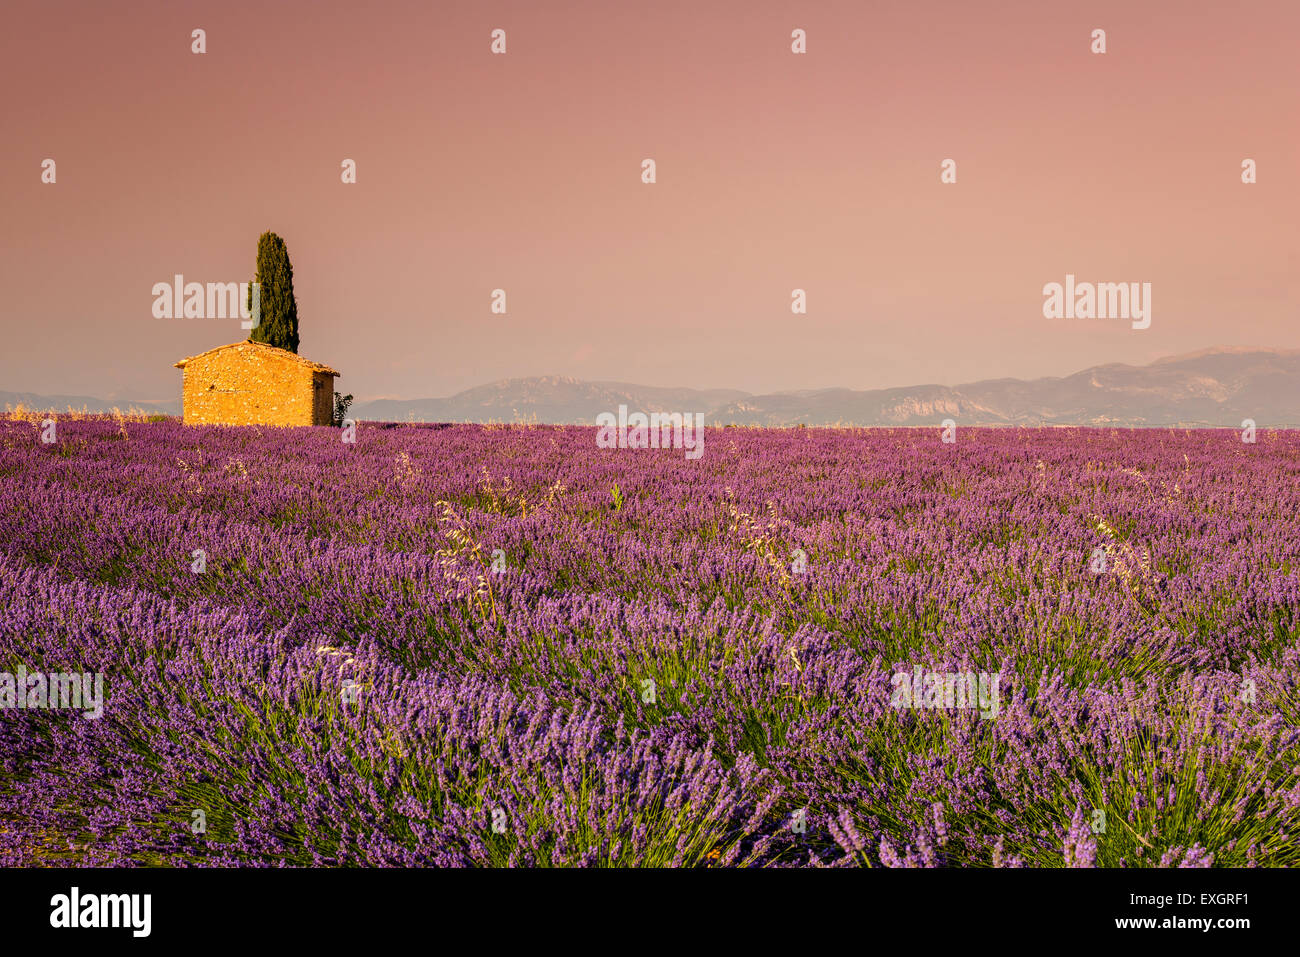 Lavender field with lonely stone cottage and cypress tree at sunset, Plateau de Valensole, Provence, France Stock Photo